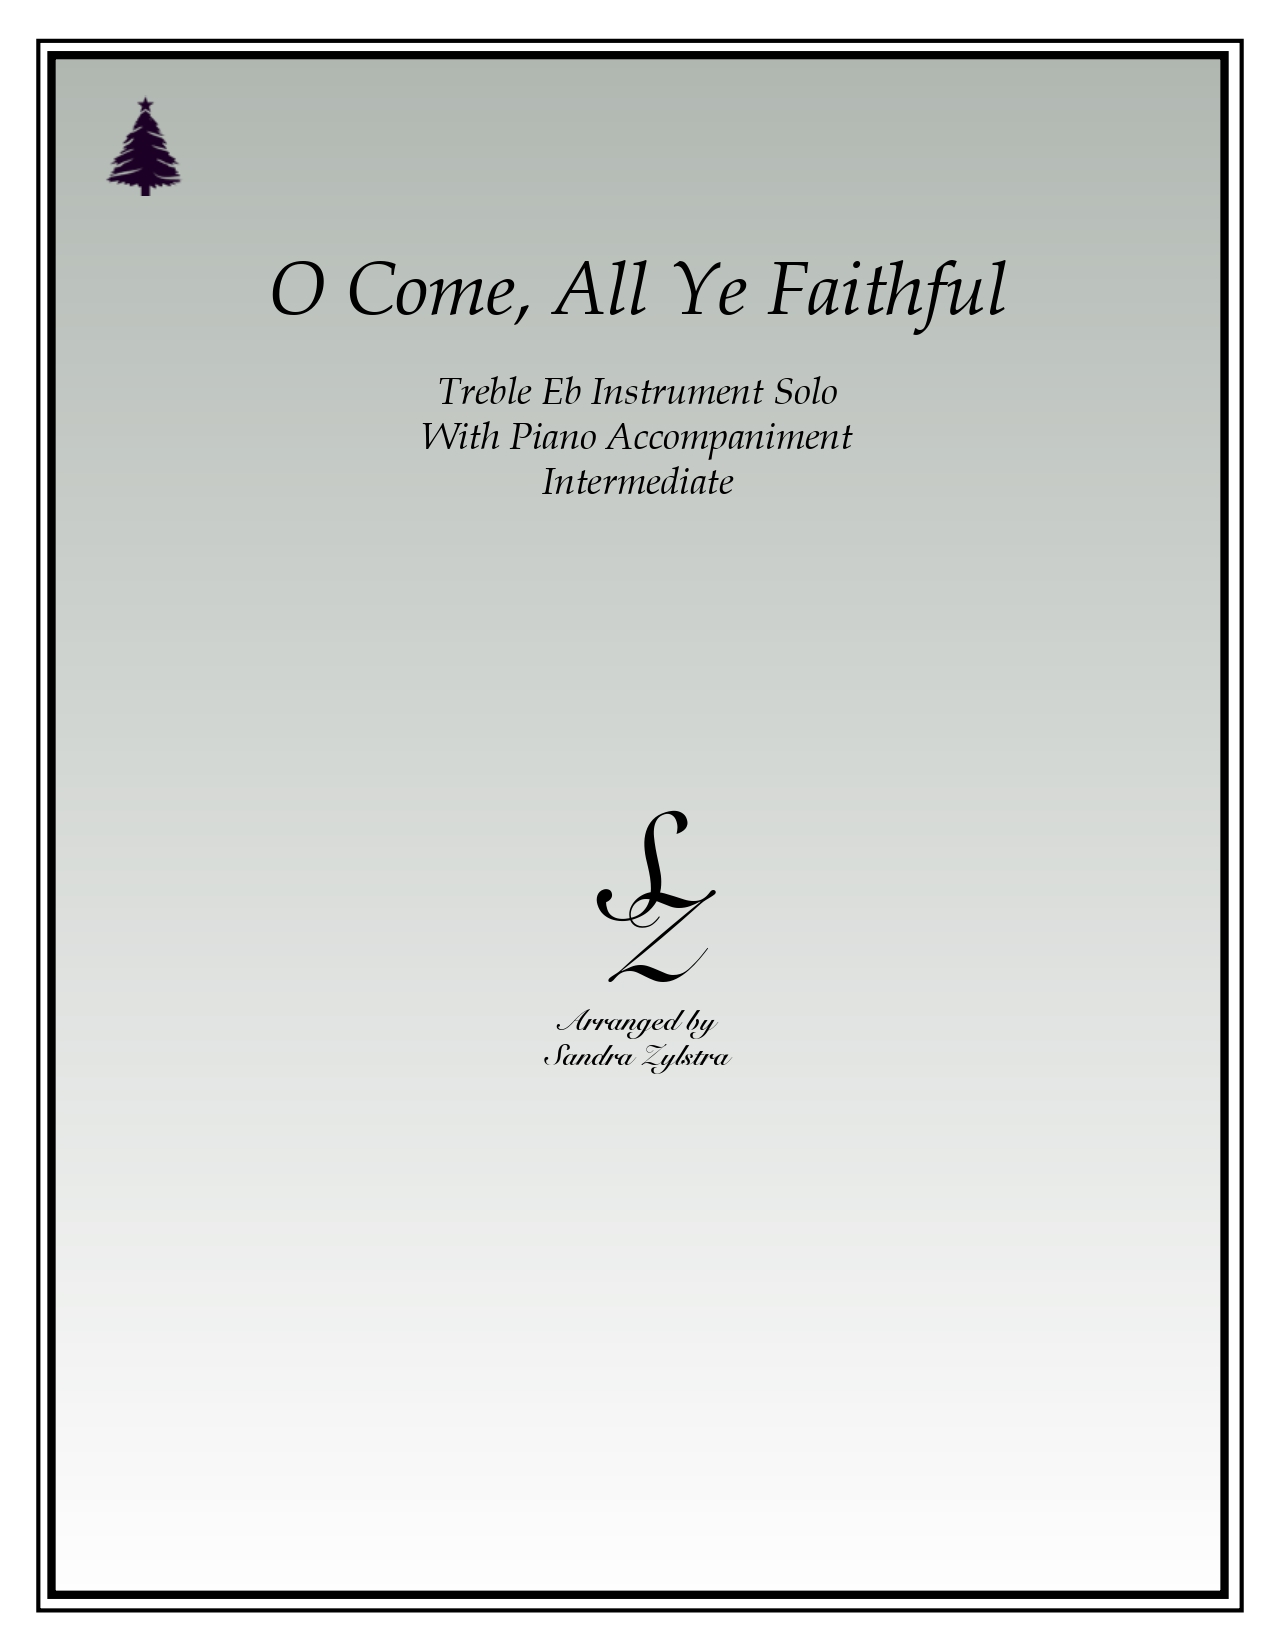 O Come All Ye Faithful Eb instrument solo part cover page 00011